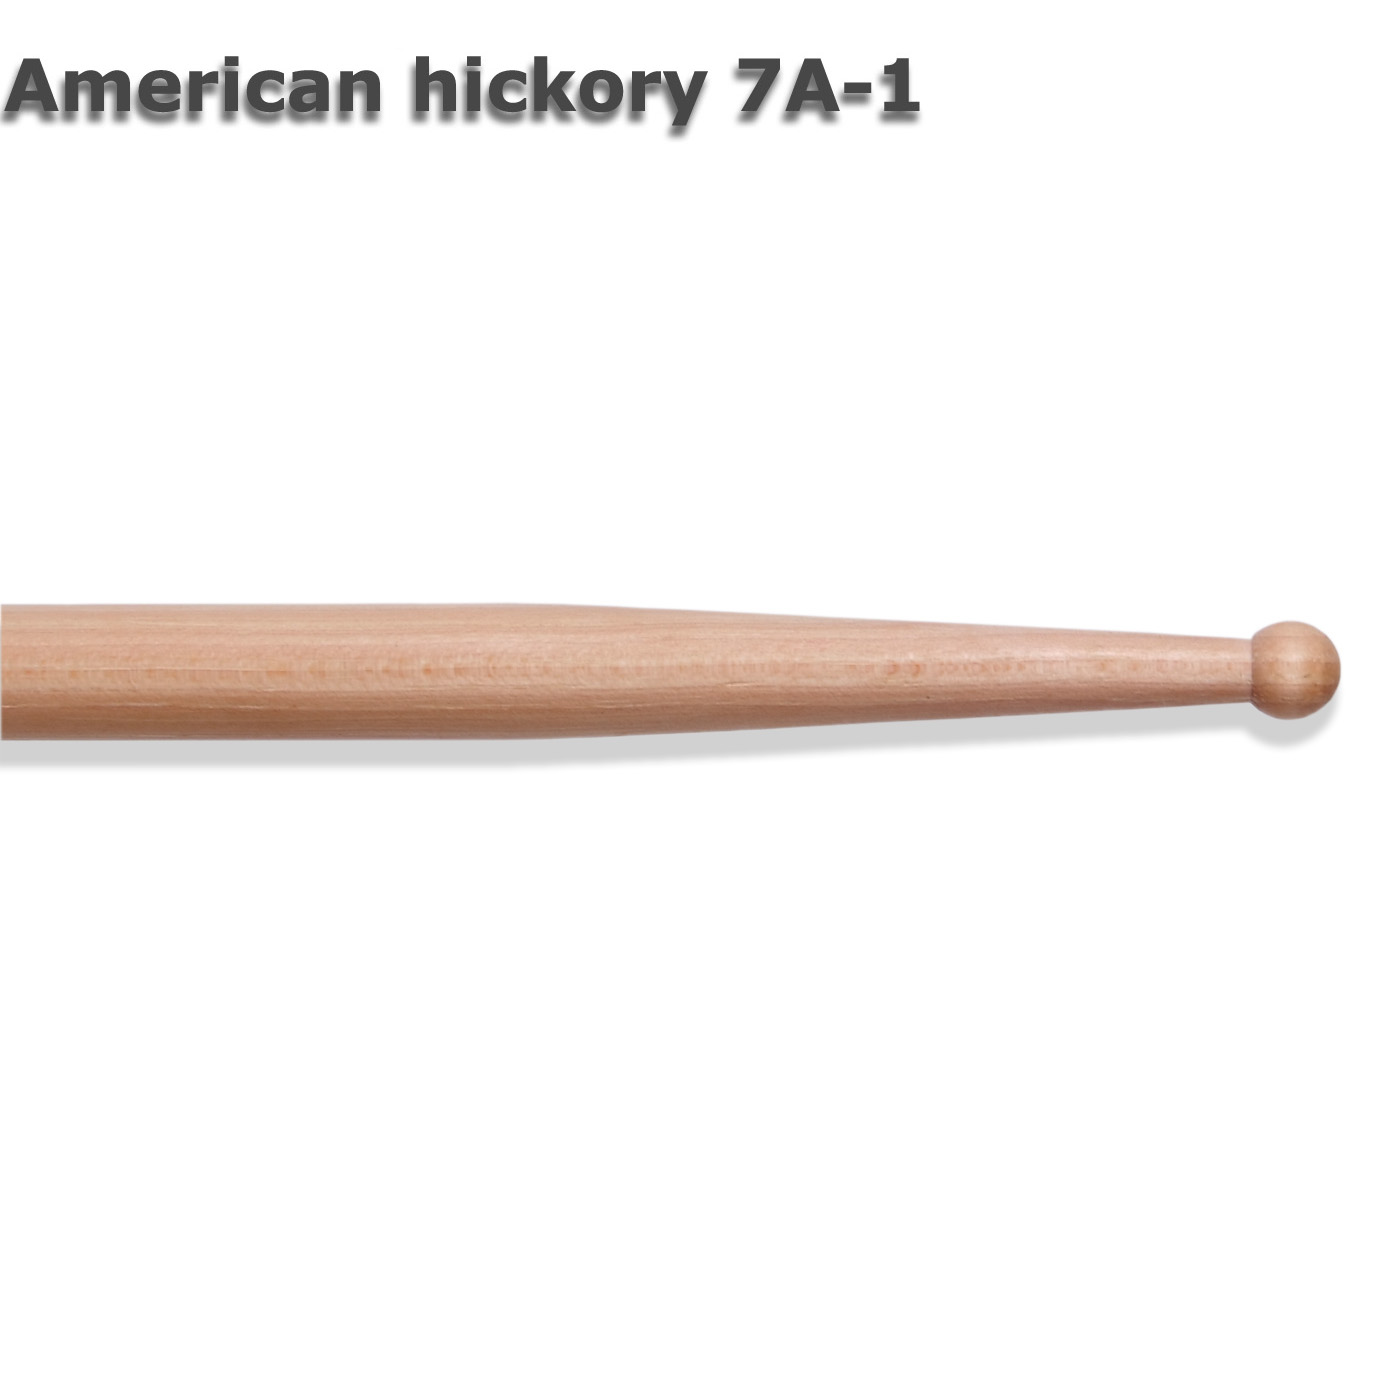 American hickory drumstick 7A-1